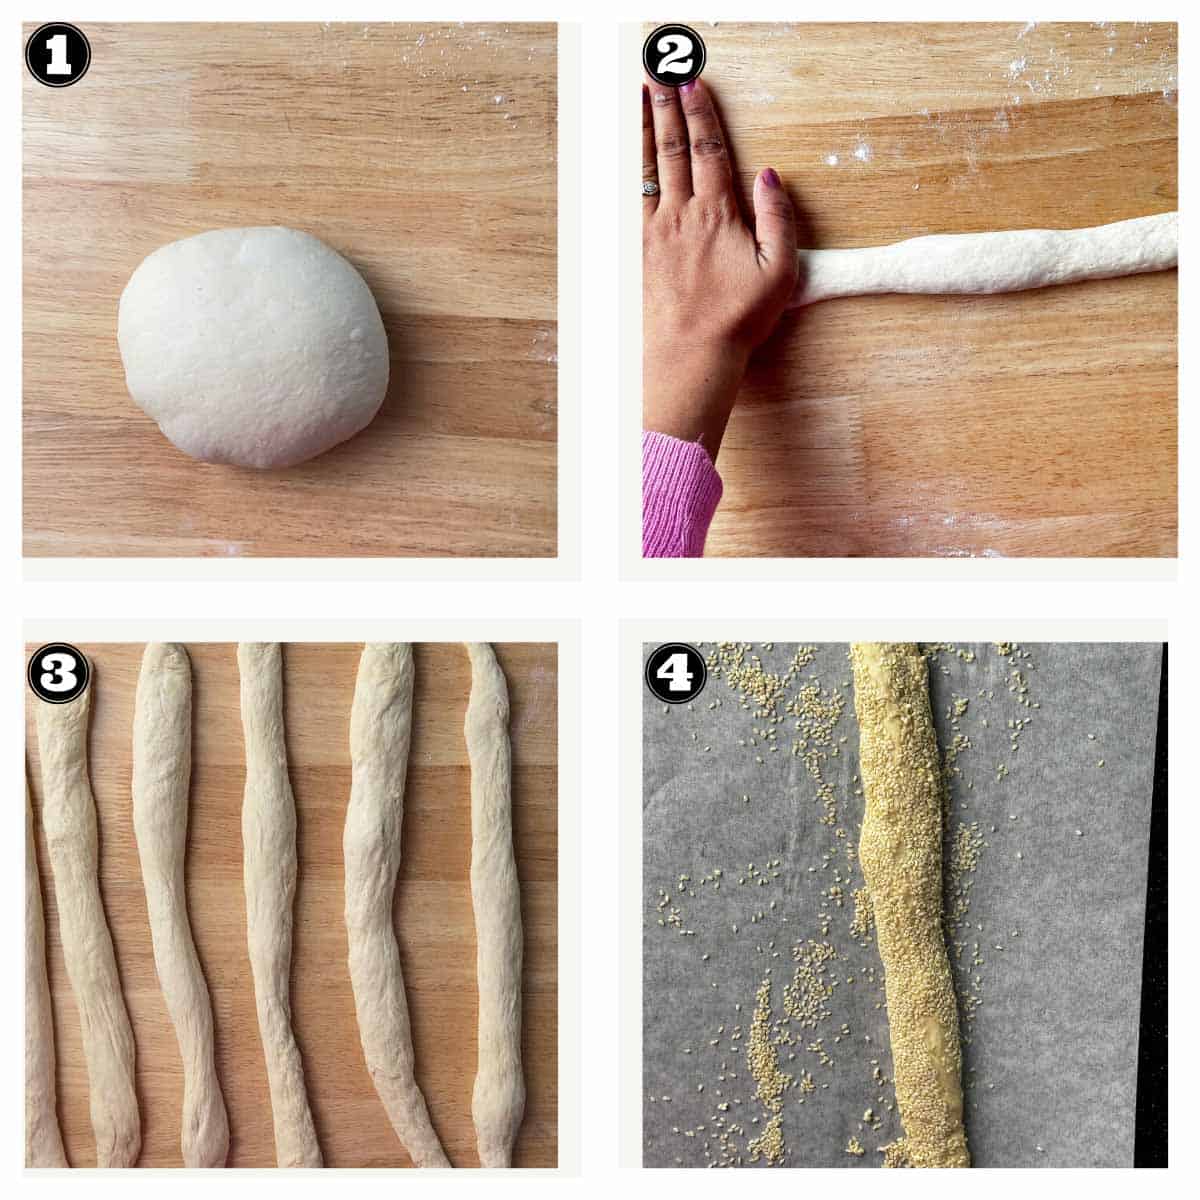 images of shaping the dough strands